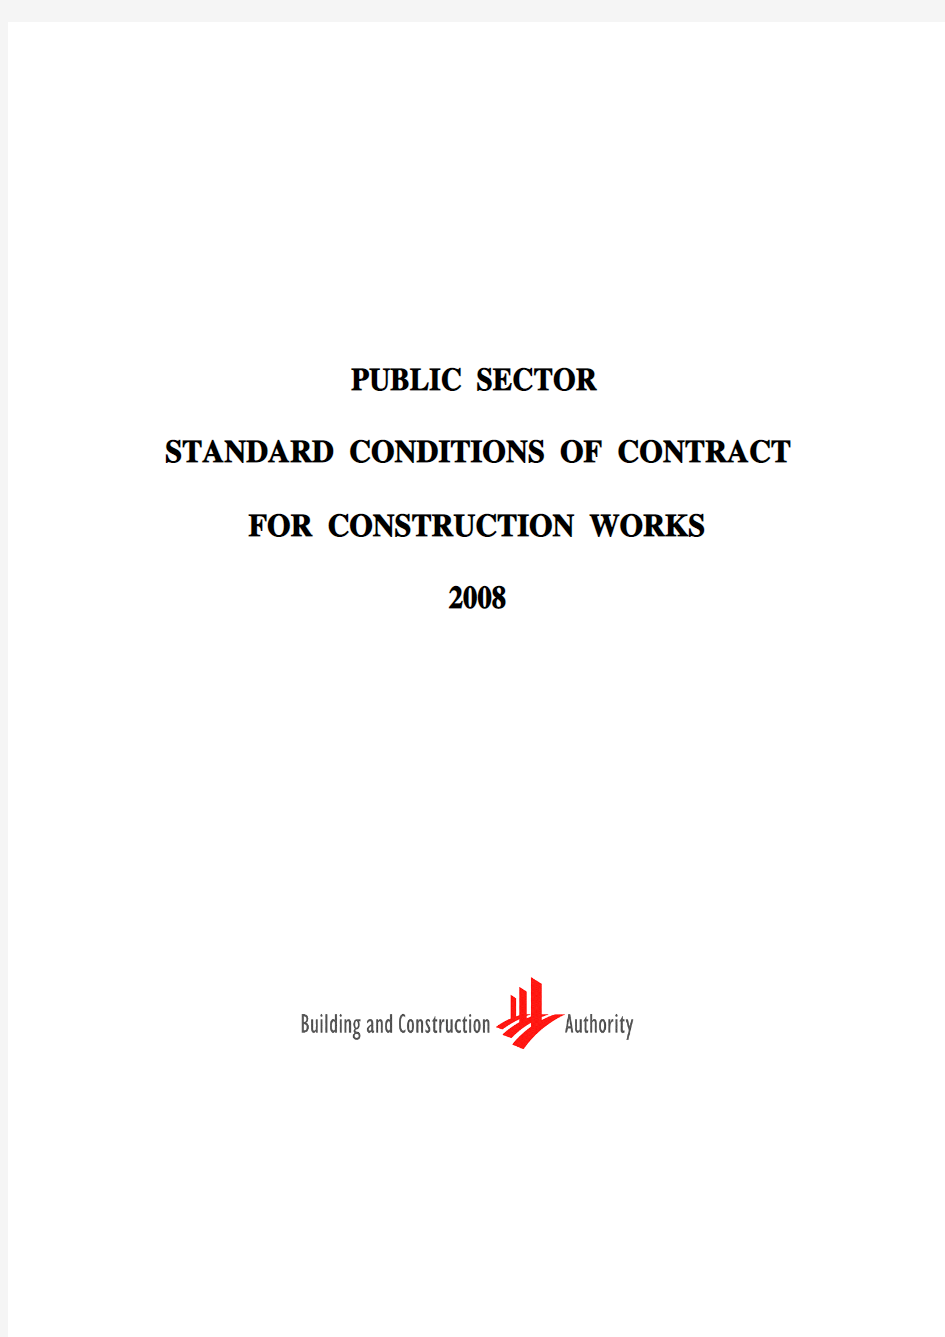 1.PSSCOC for Construction Works 2008 (6th edition Dec 2008)